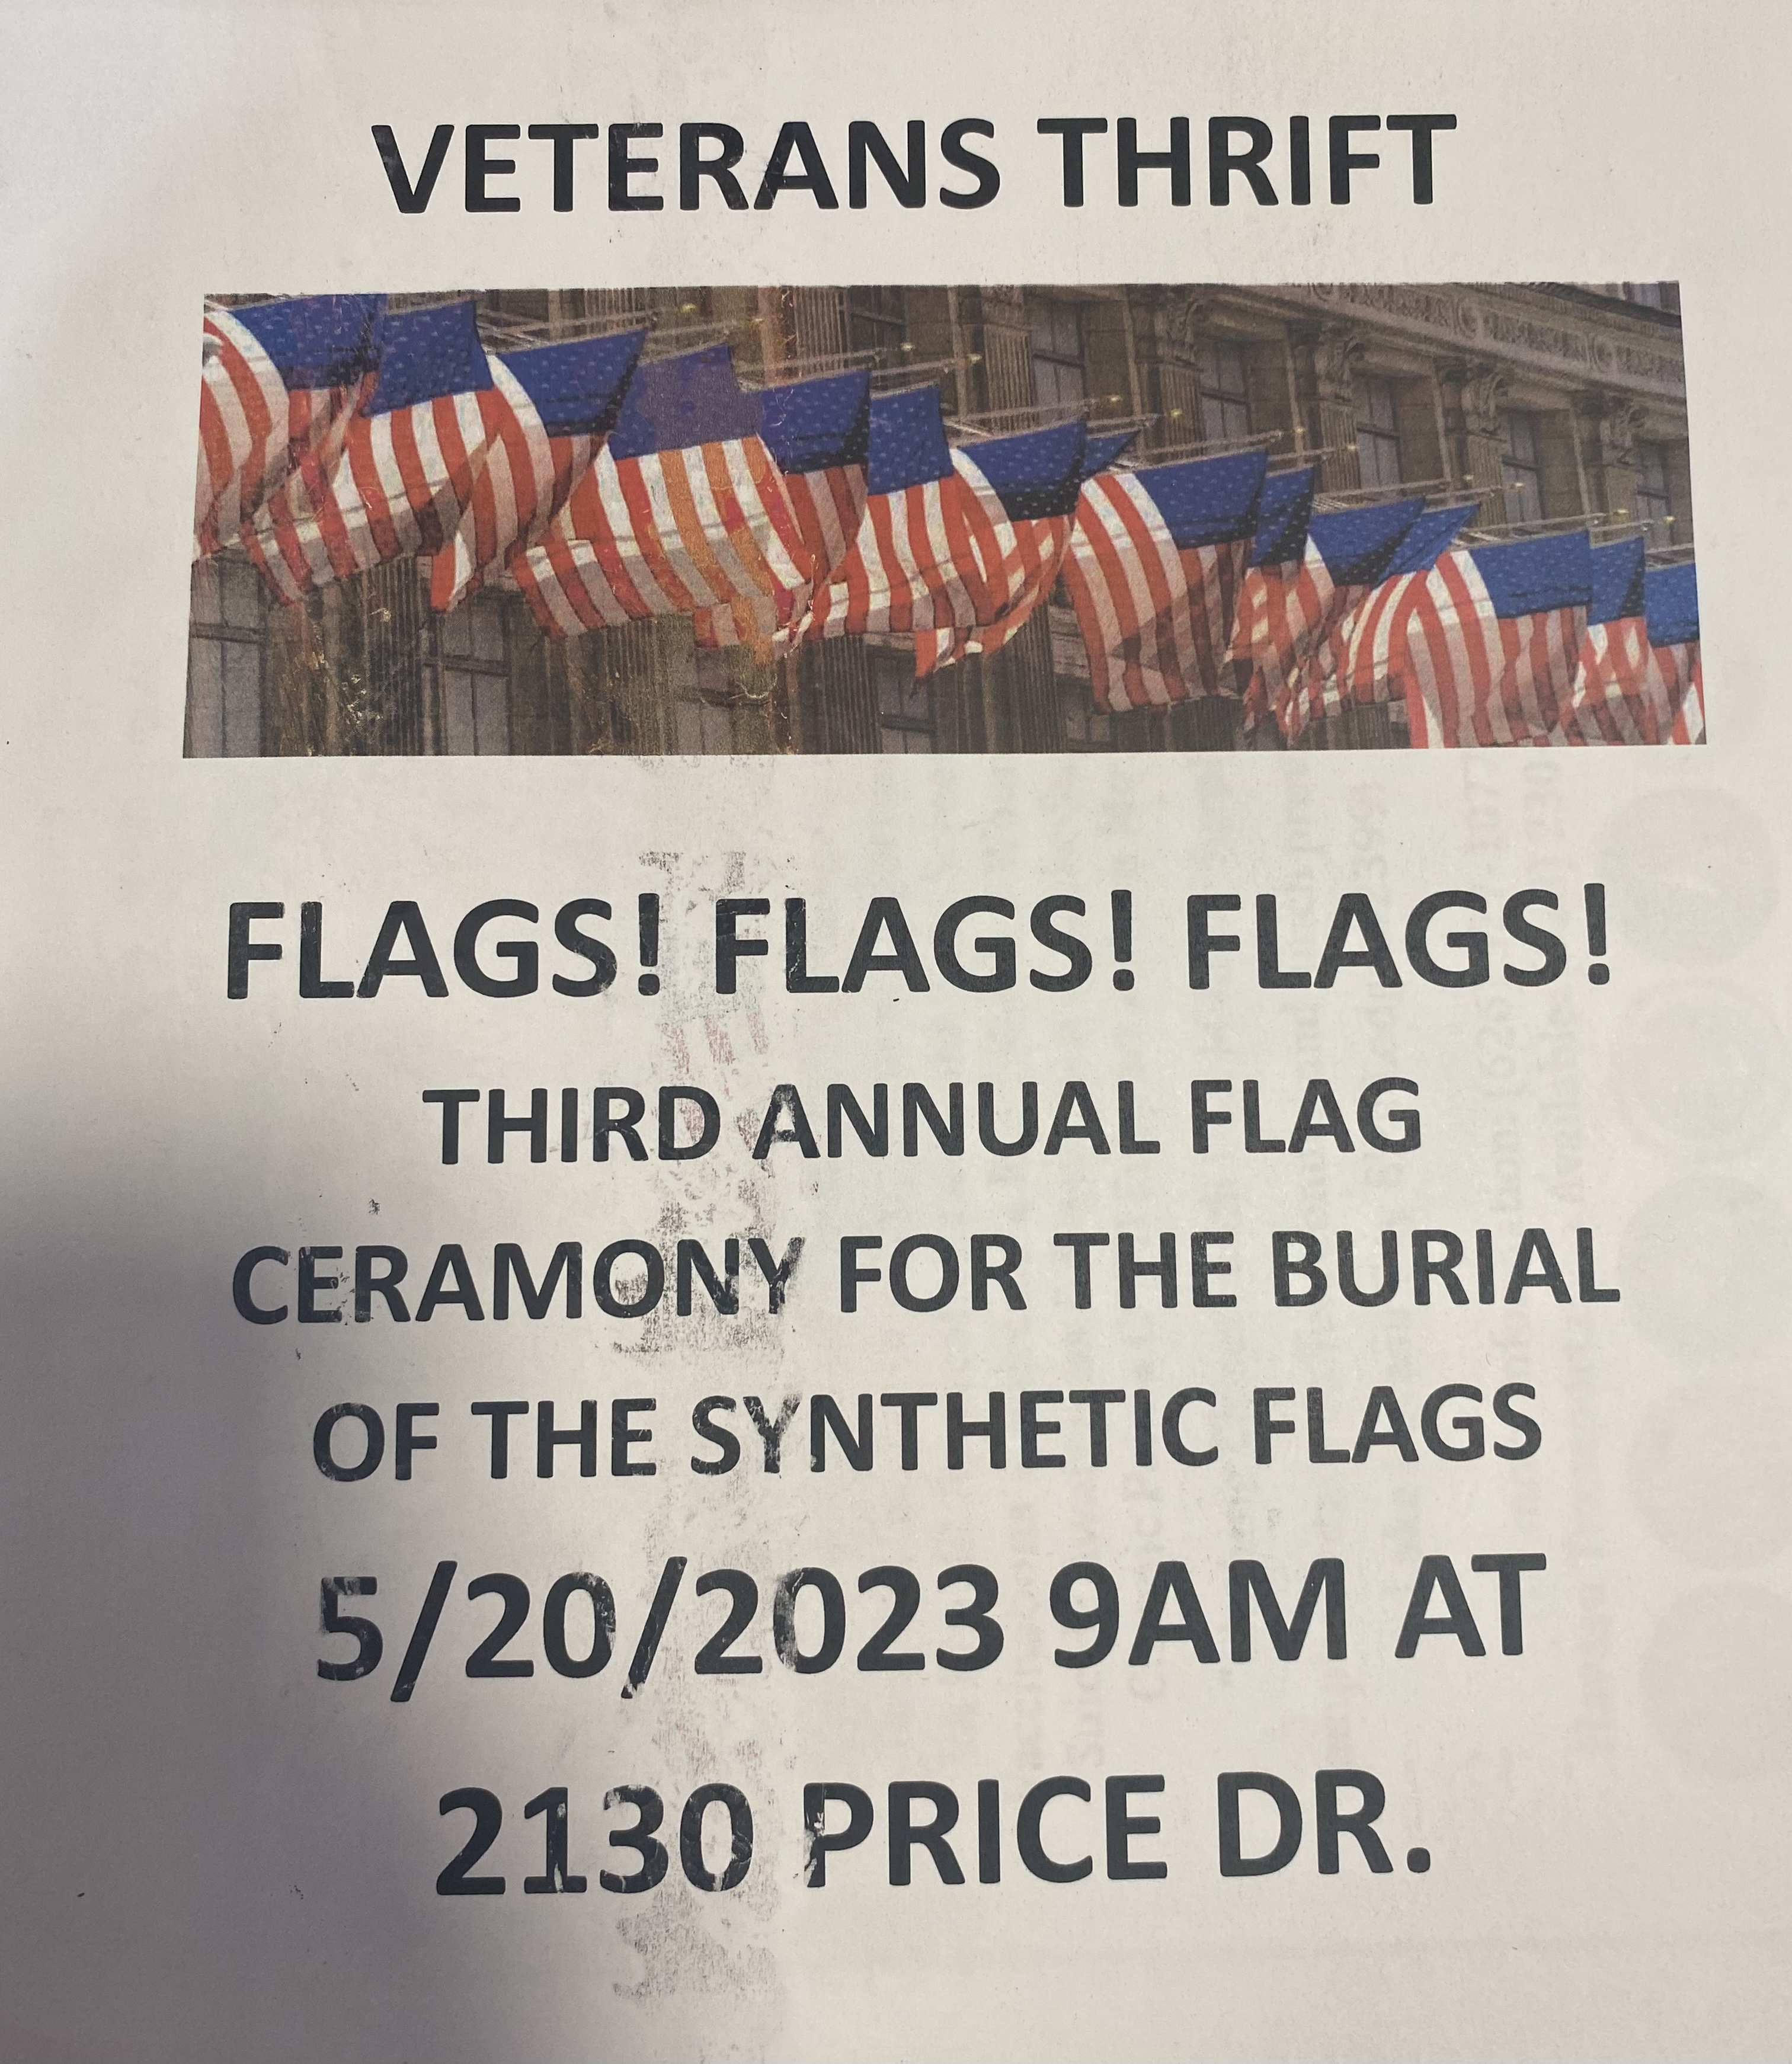 Third Annual Flag Ceremony for Burial